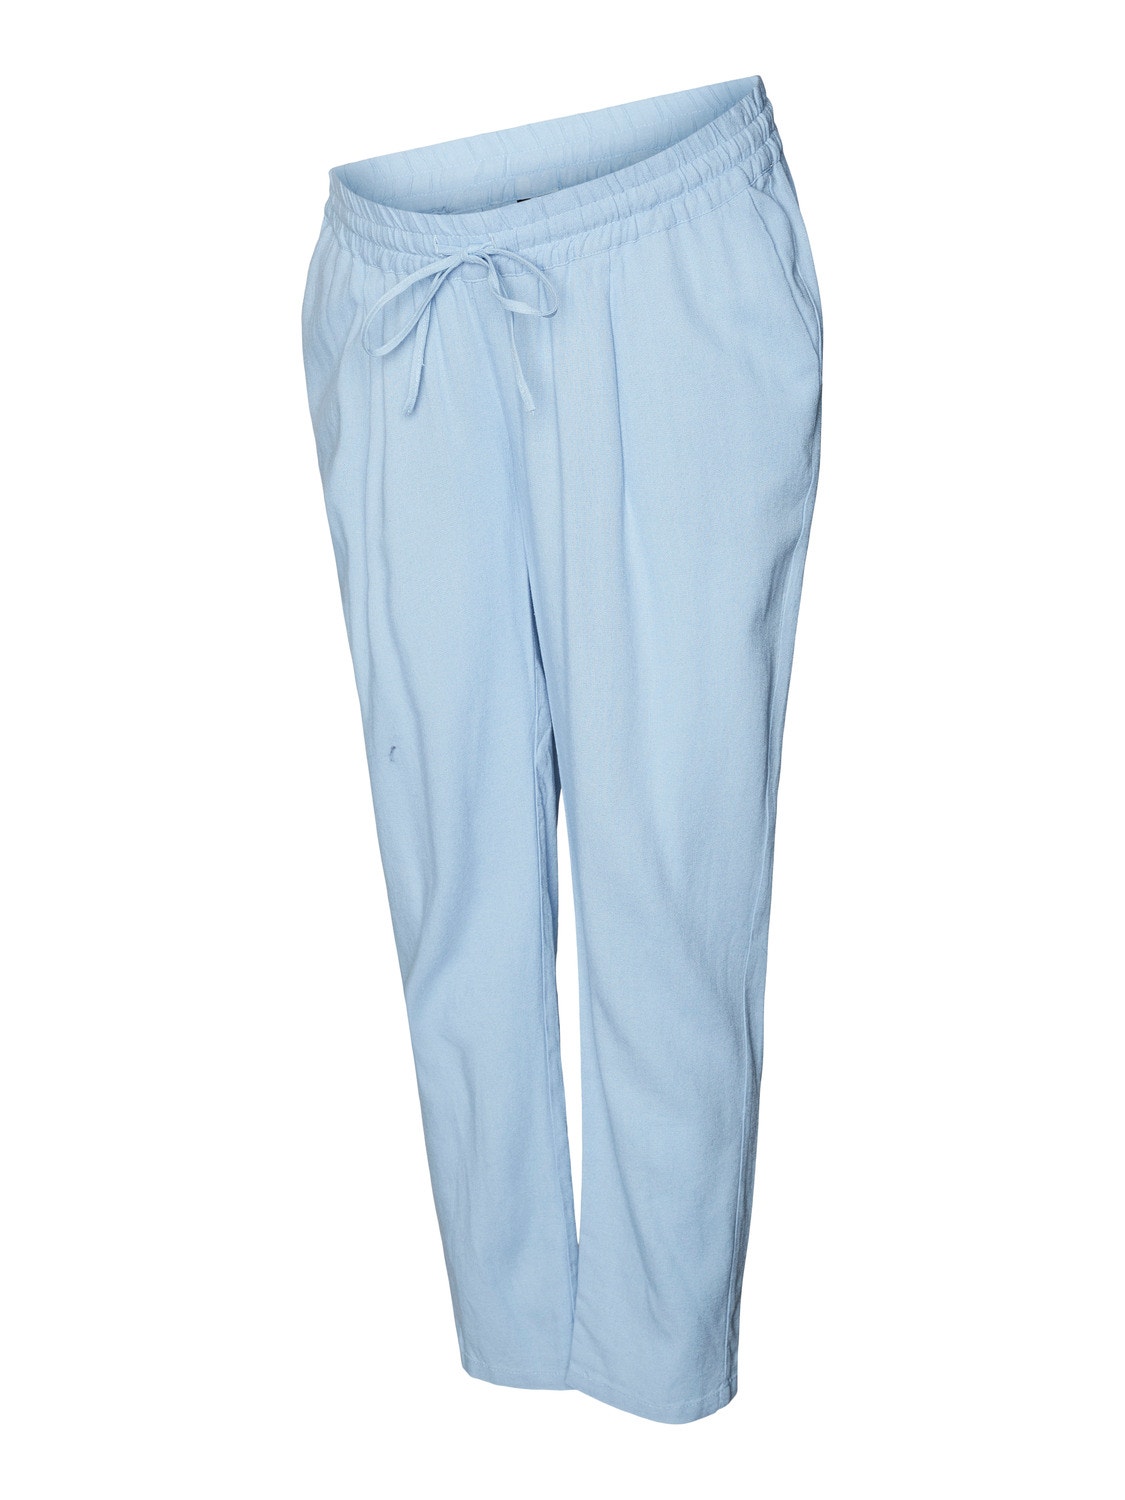 MAMA.LICIOUS Regular Fit Trousers -Blue Bell - 20016050